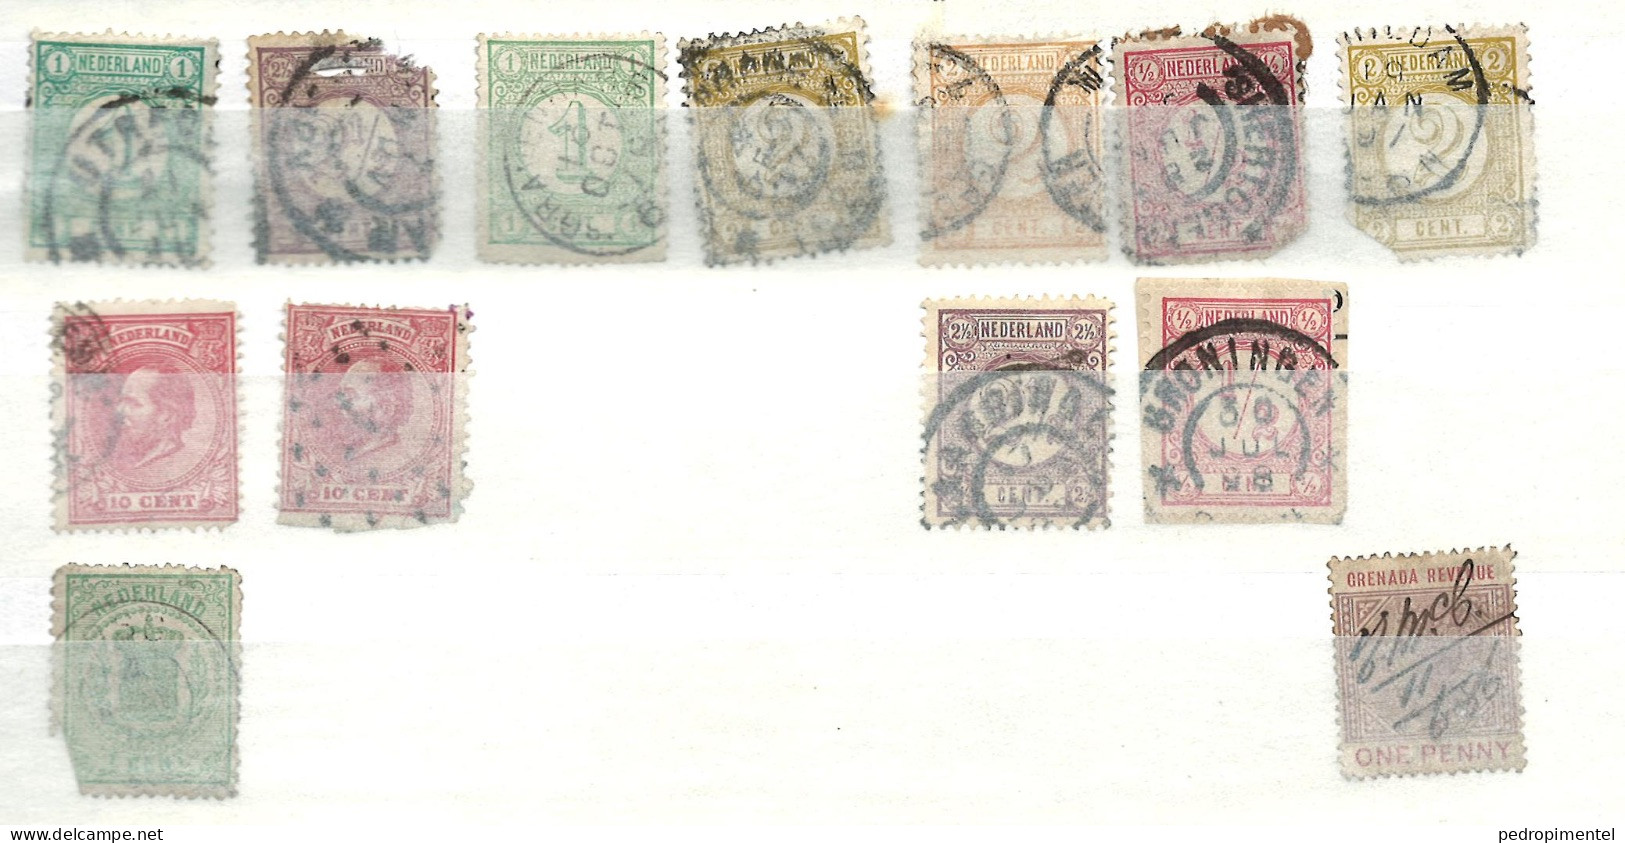 Netherlands | Small Collection | Pre WW | Used (Mixed Quality) - Colecciones Completas